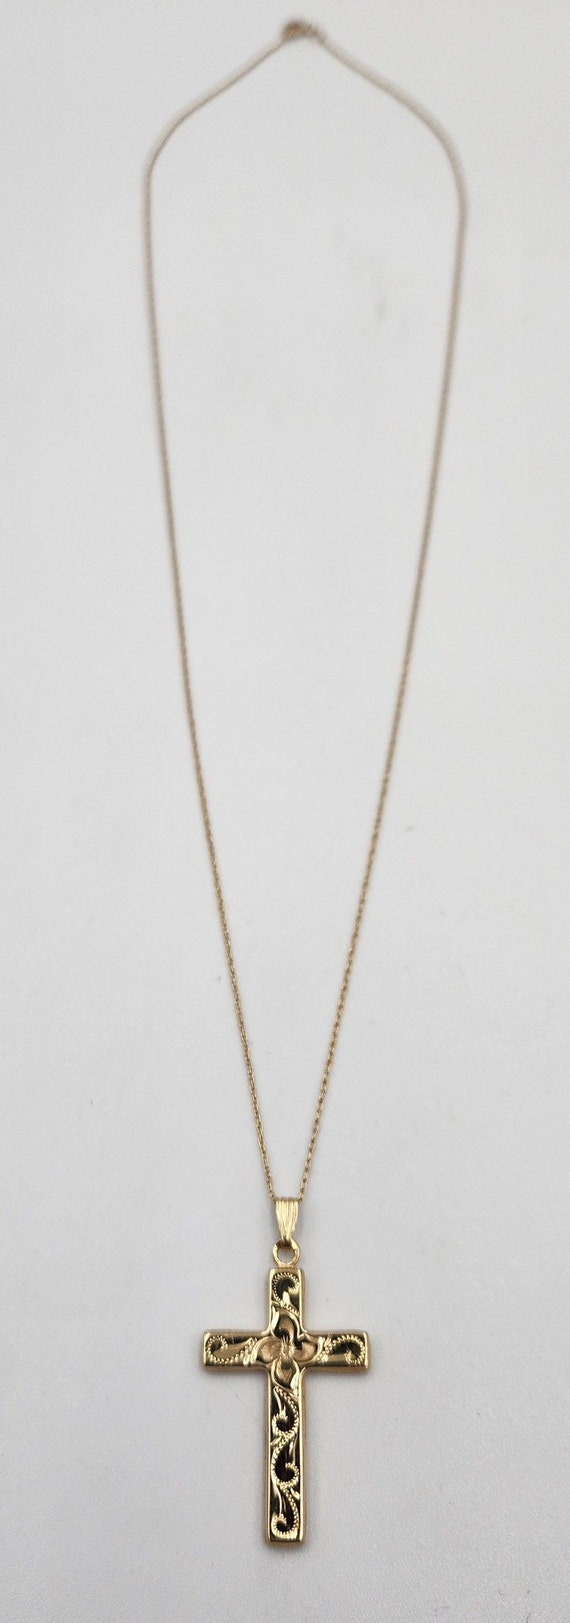 Yellow Gold Floral Hollow Cross Necklace, 18" - image 2